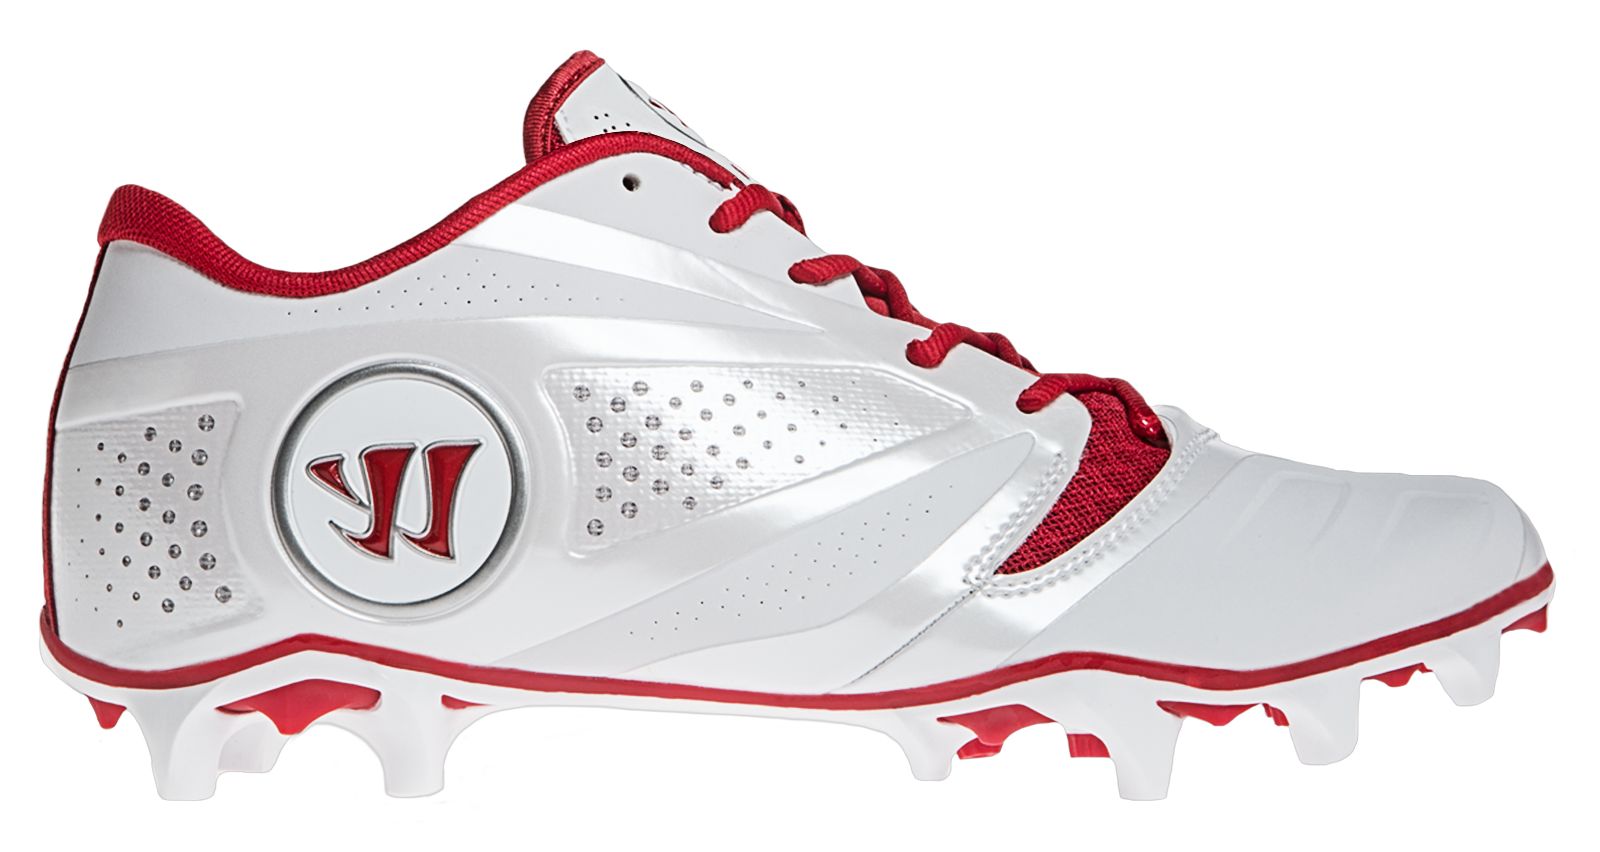 Burn 7.0 Low Cleat,  image number 0